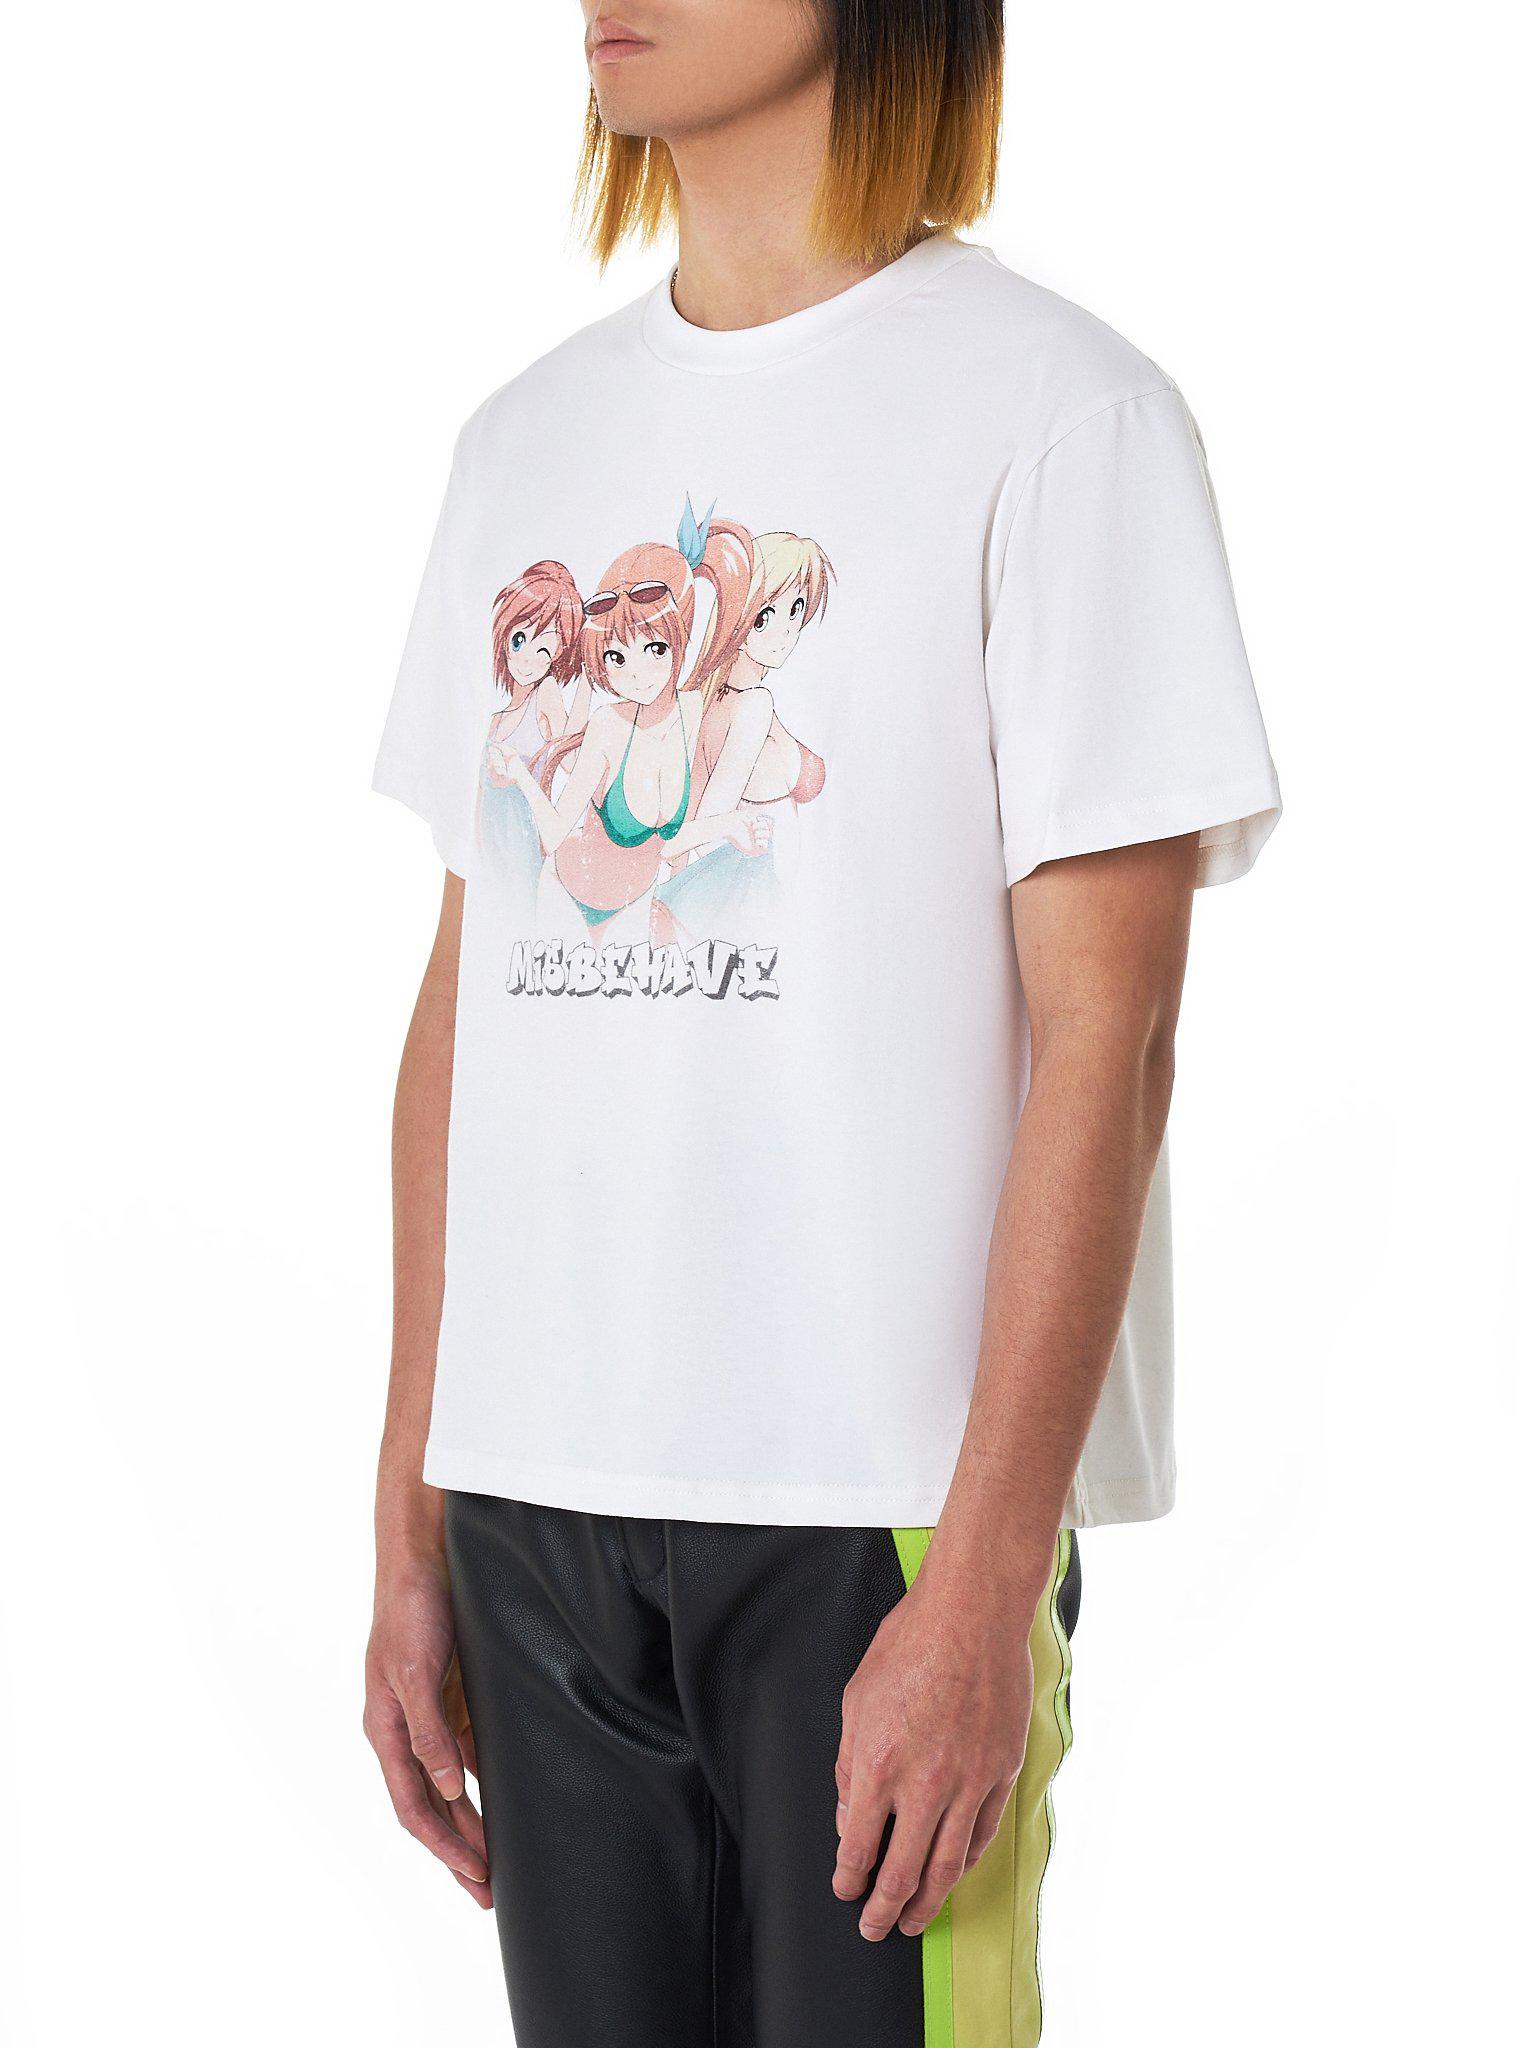 MISBHV Cotton Harajuku Tee in White for Men - Lyst